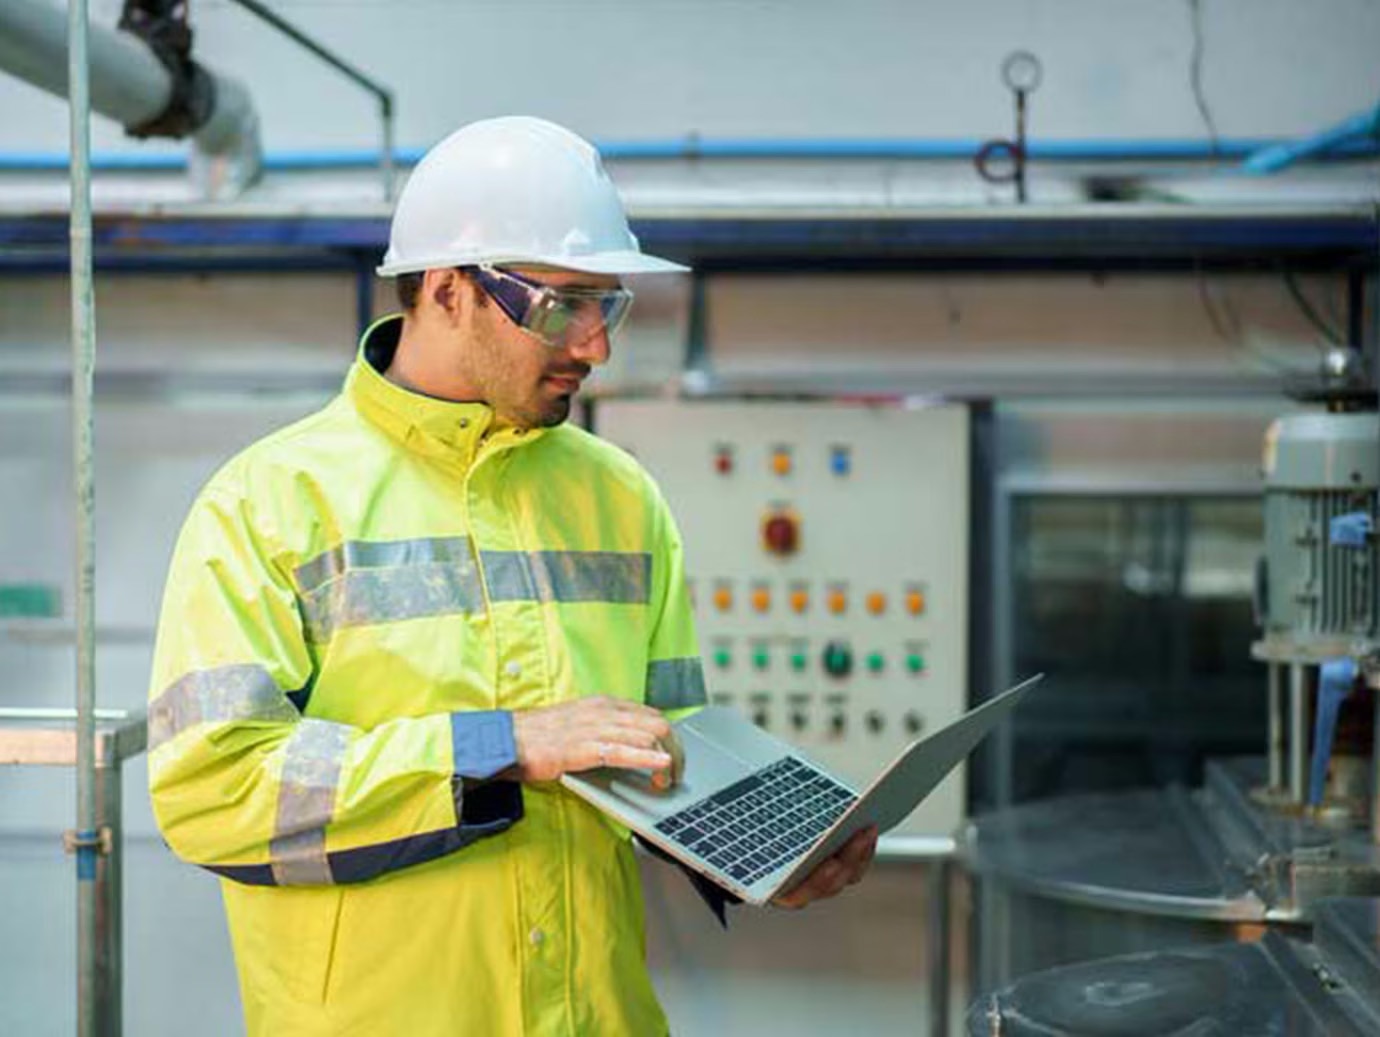 A mechanic in protective gear holding a laptop